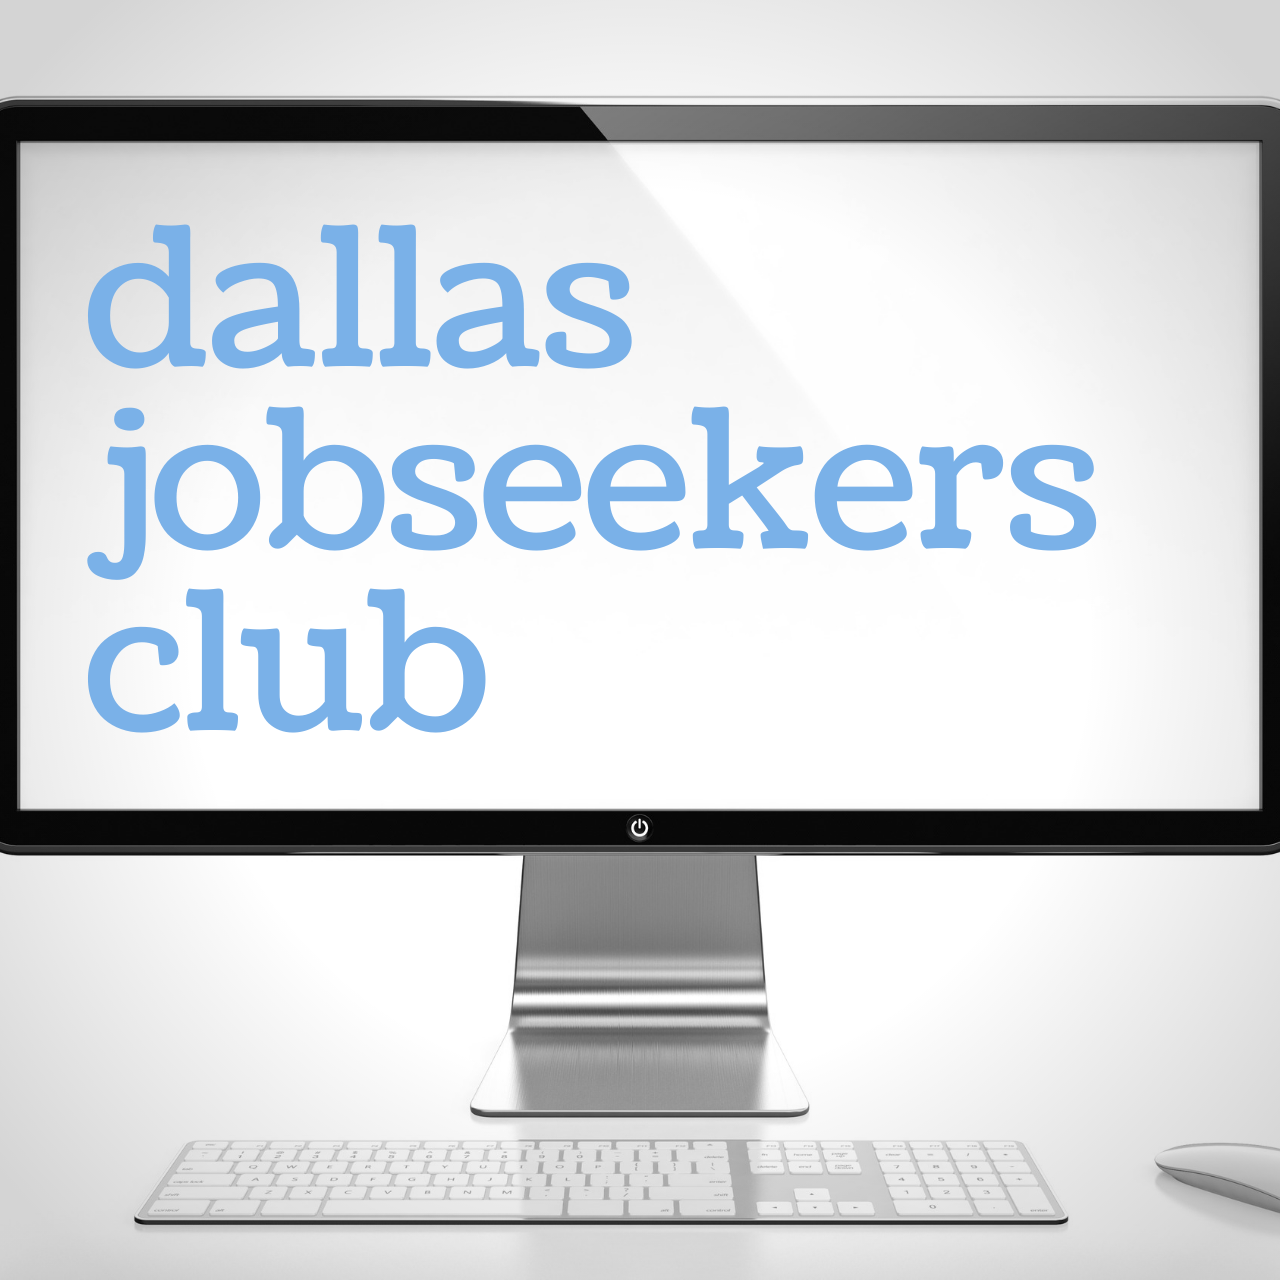 A computer screen displaying the words dallas jobseekers club